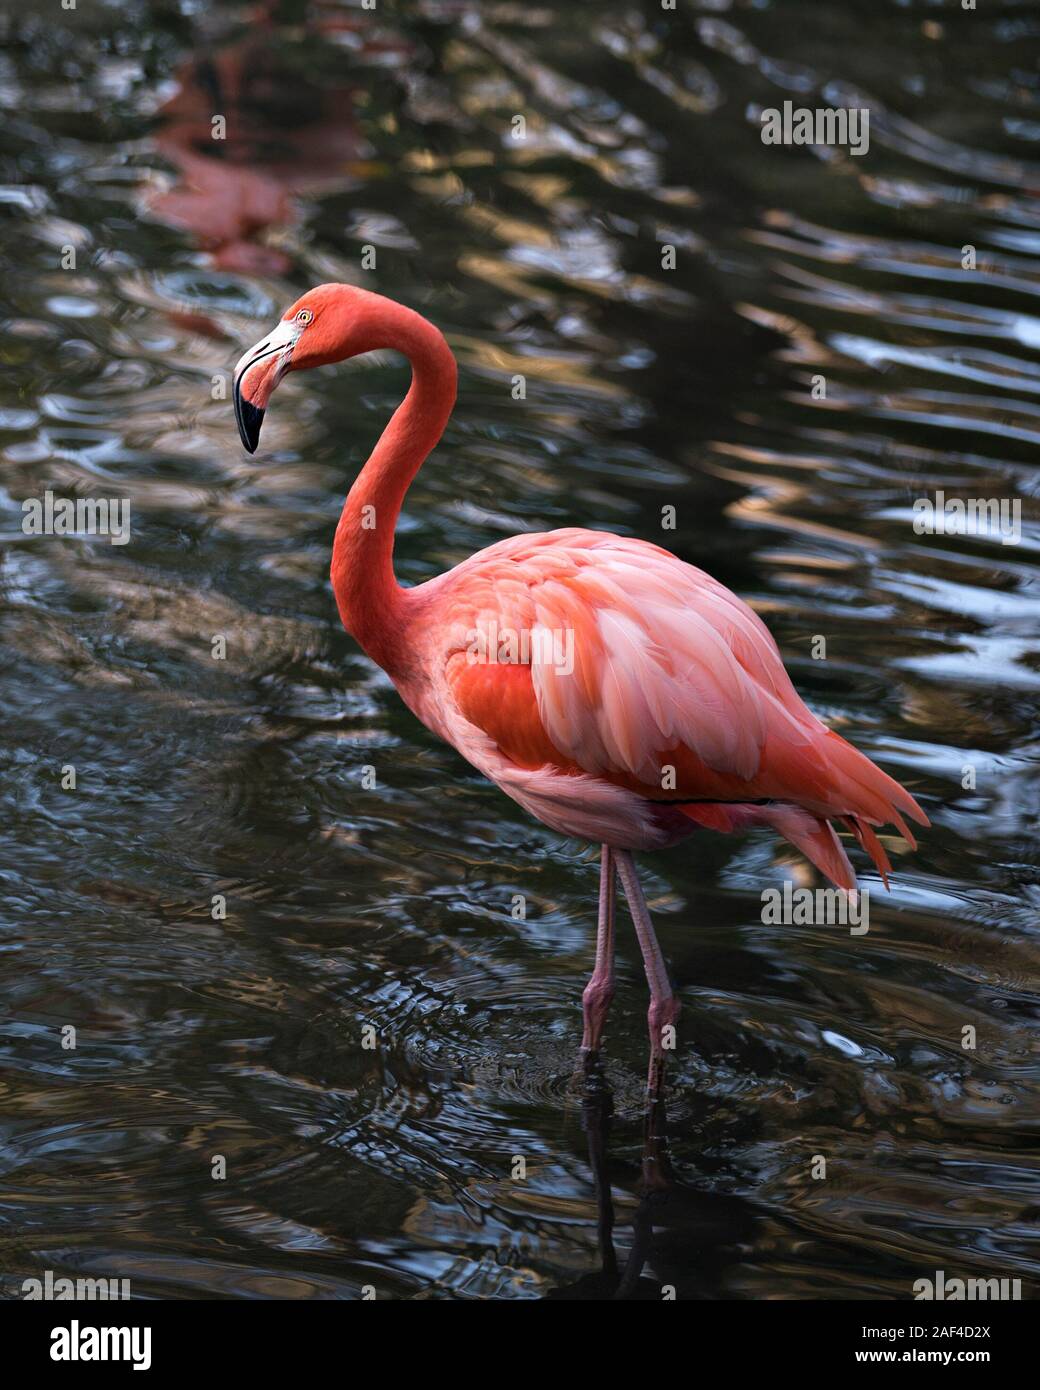 Flamingo bird close-up profile view in the water displaying its spread wings, beautiful plumage, pink plumage, head, long neck, beak, eye, in its surr Stock Photo